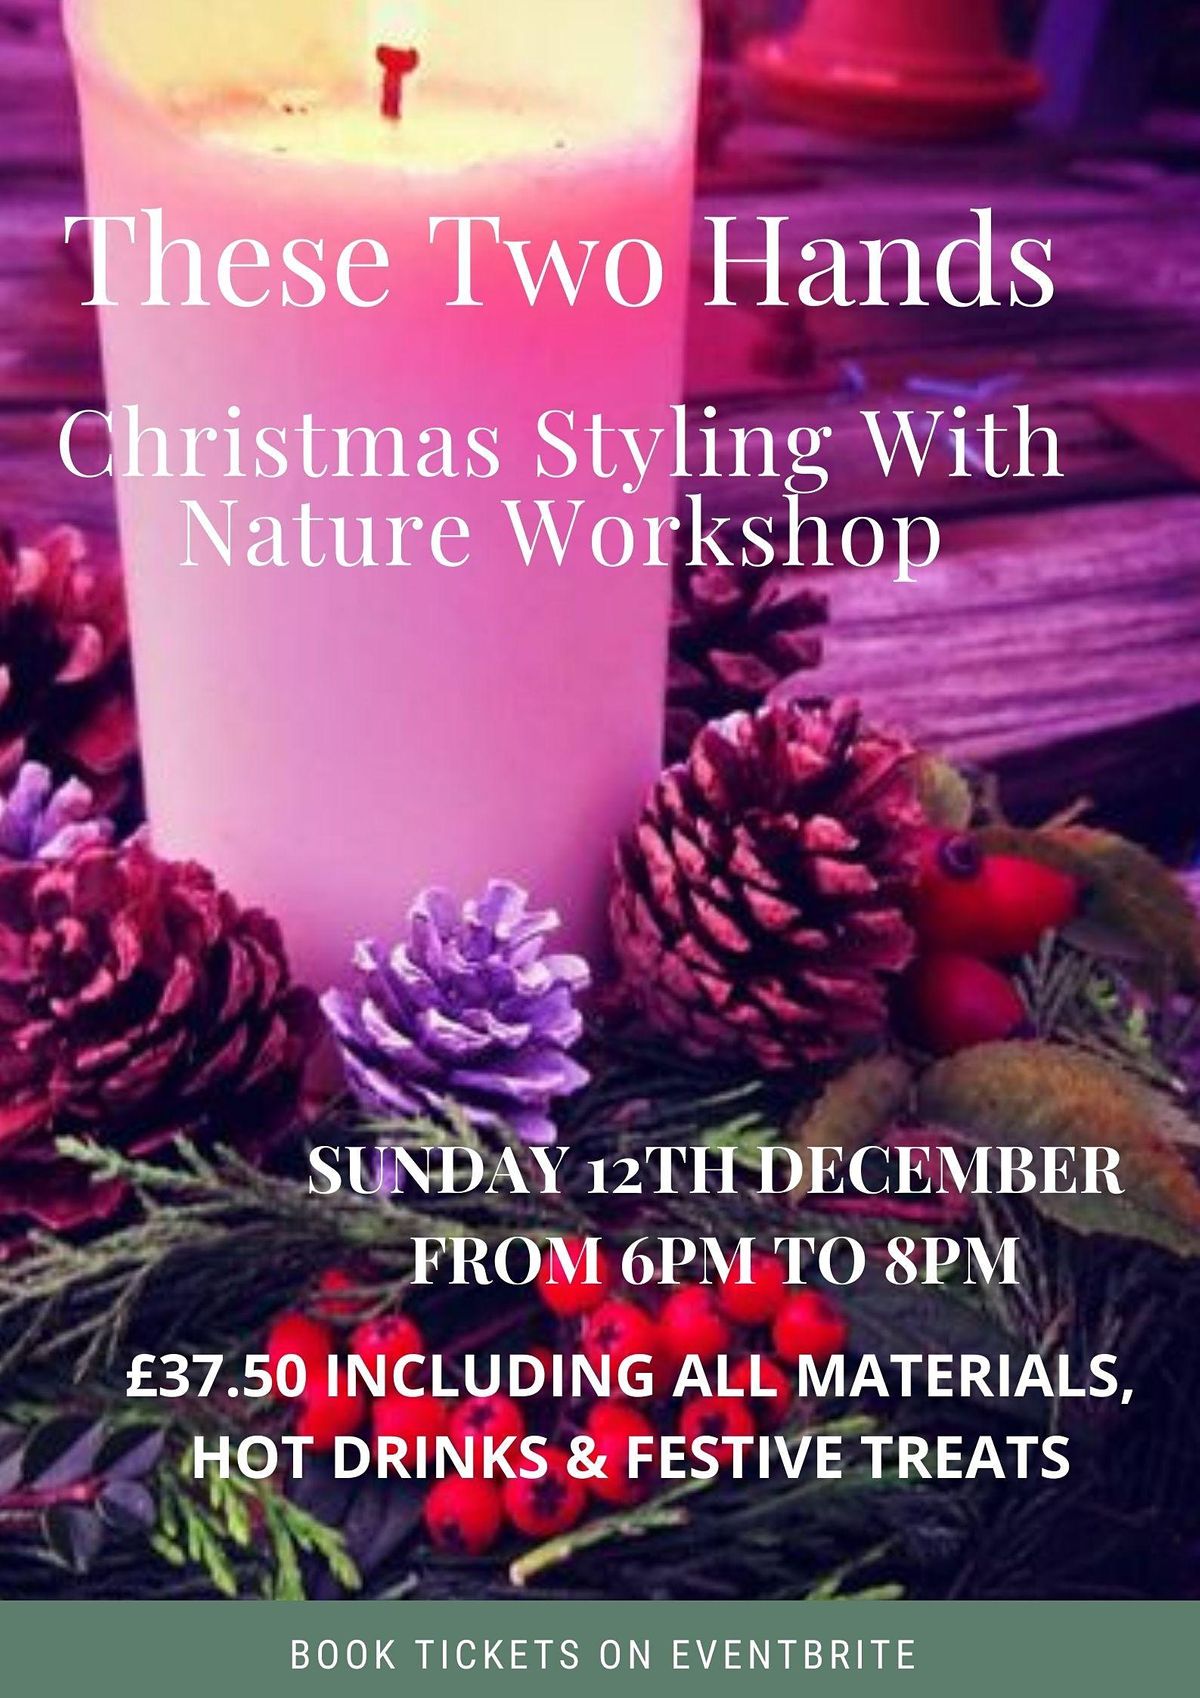 These Two Hands, Christmas Styling  with Nature Workshop